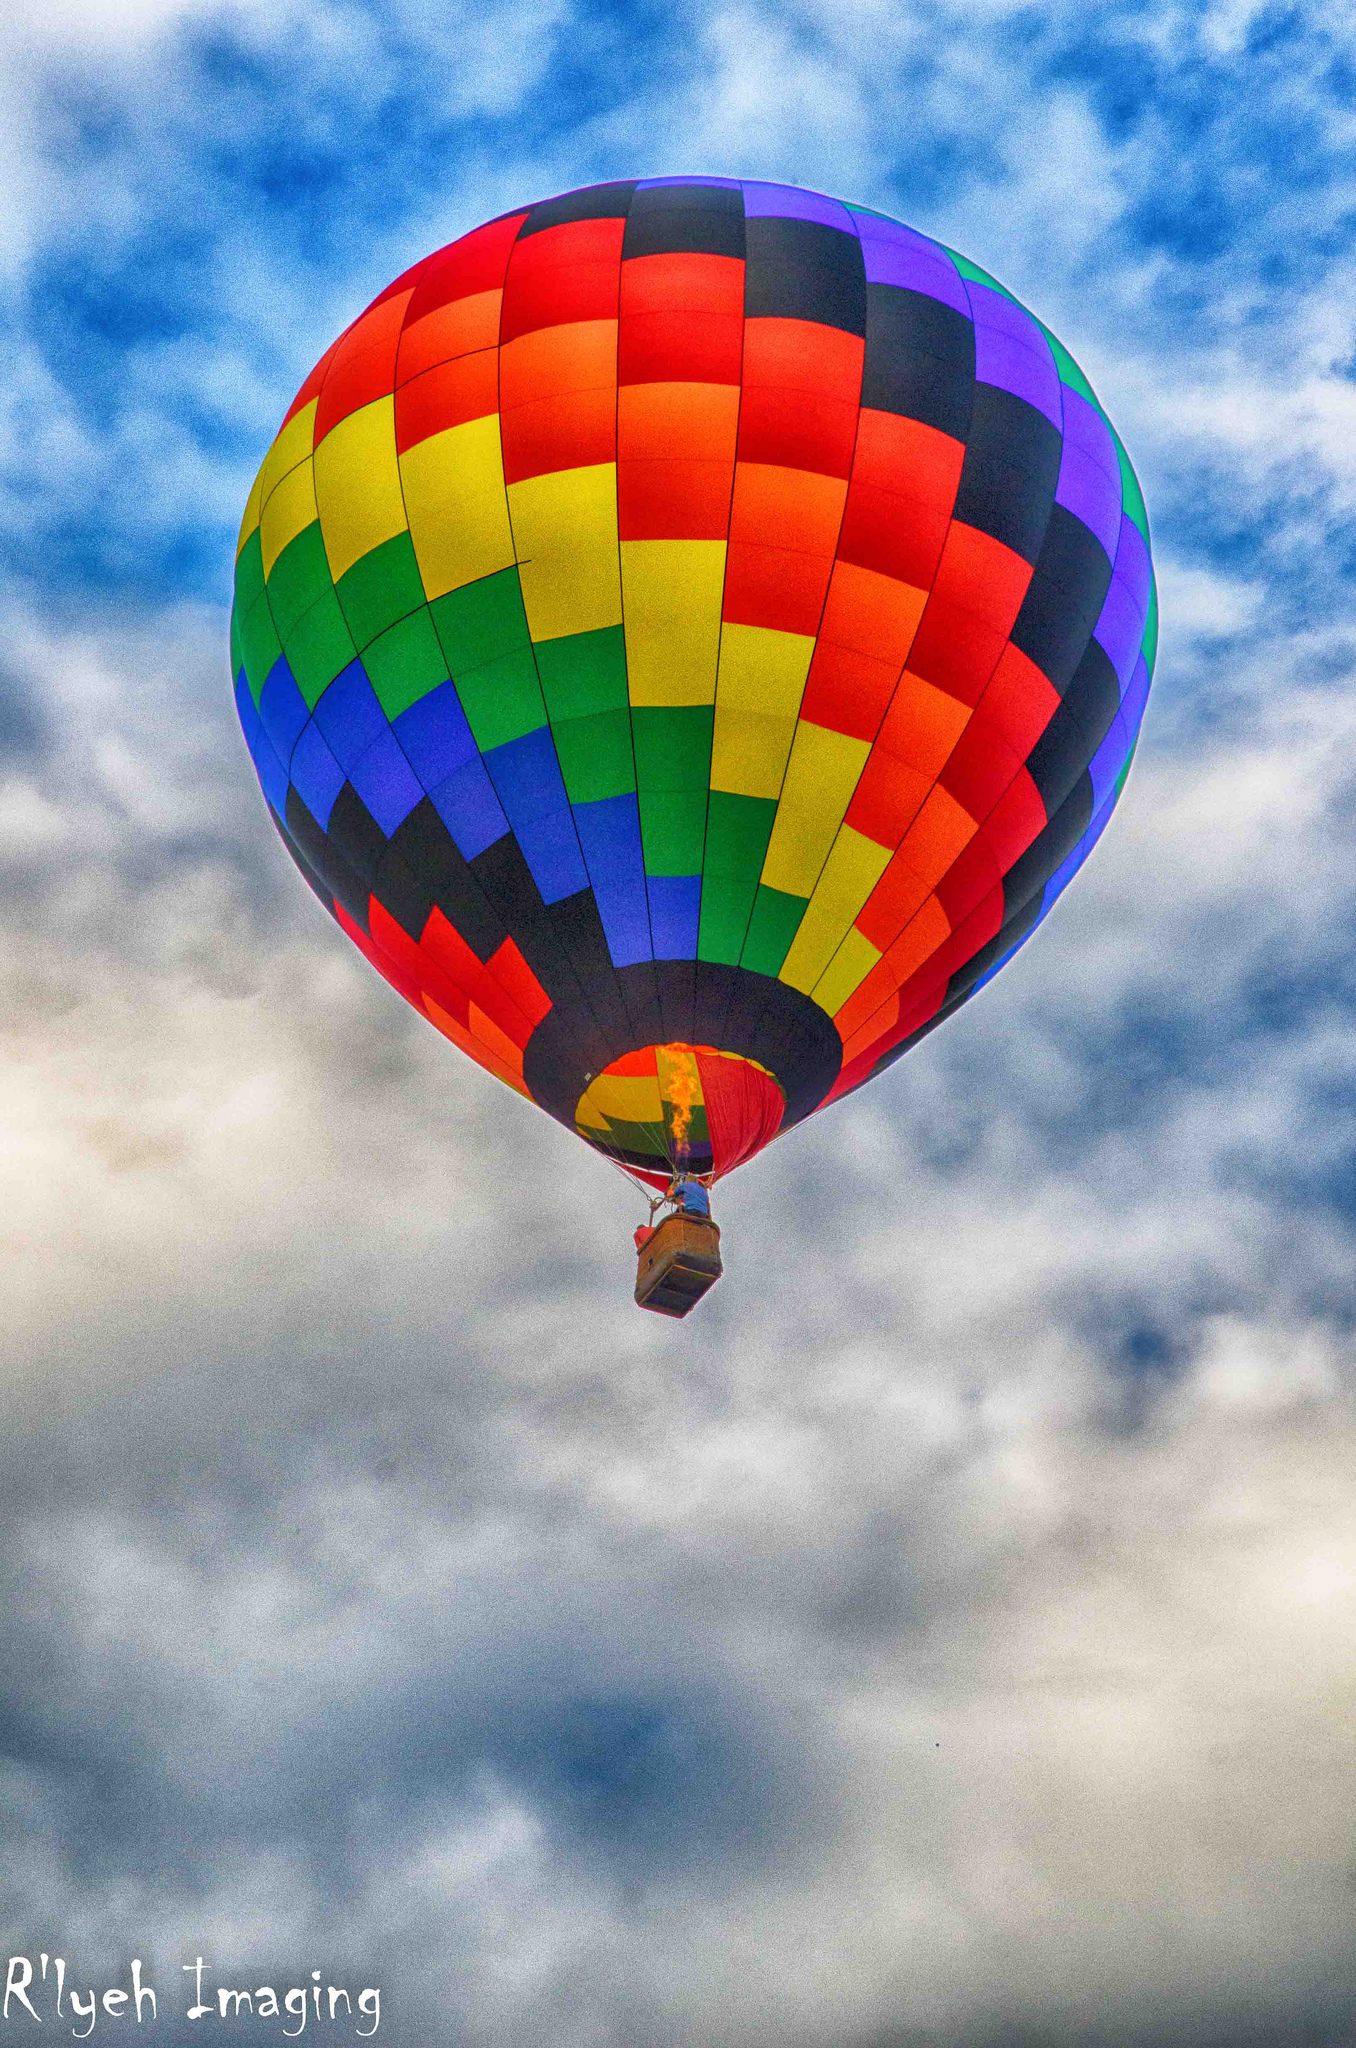 Hot Air Balloon by R'lyeh Imaging on flickr